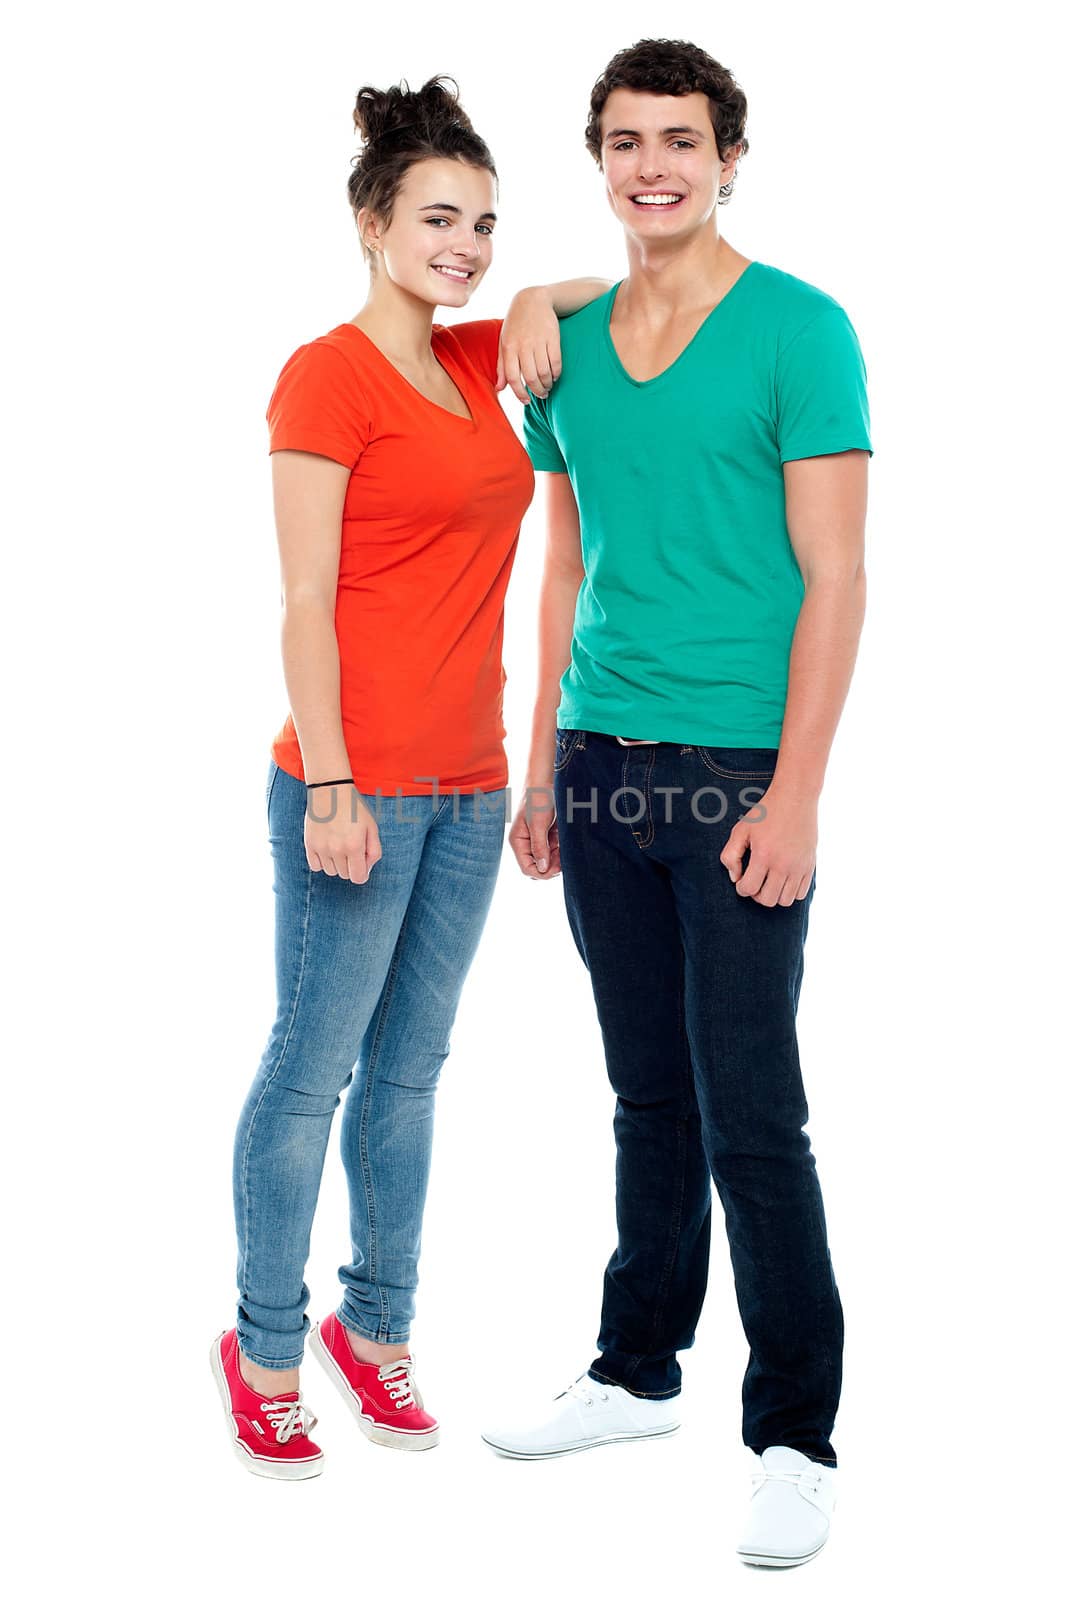 Full length portrait of fashionable young couple. Girl resting her hand on boy's shoulder